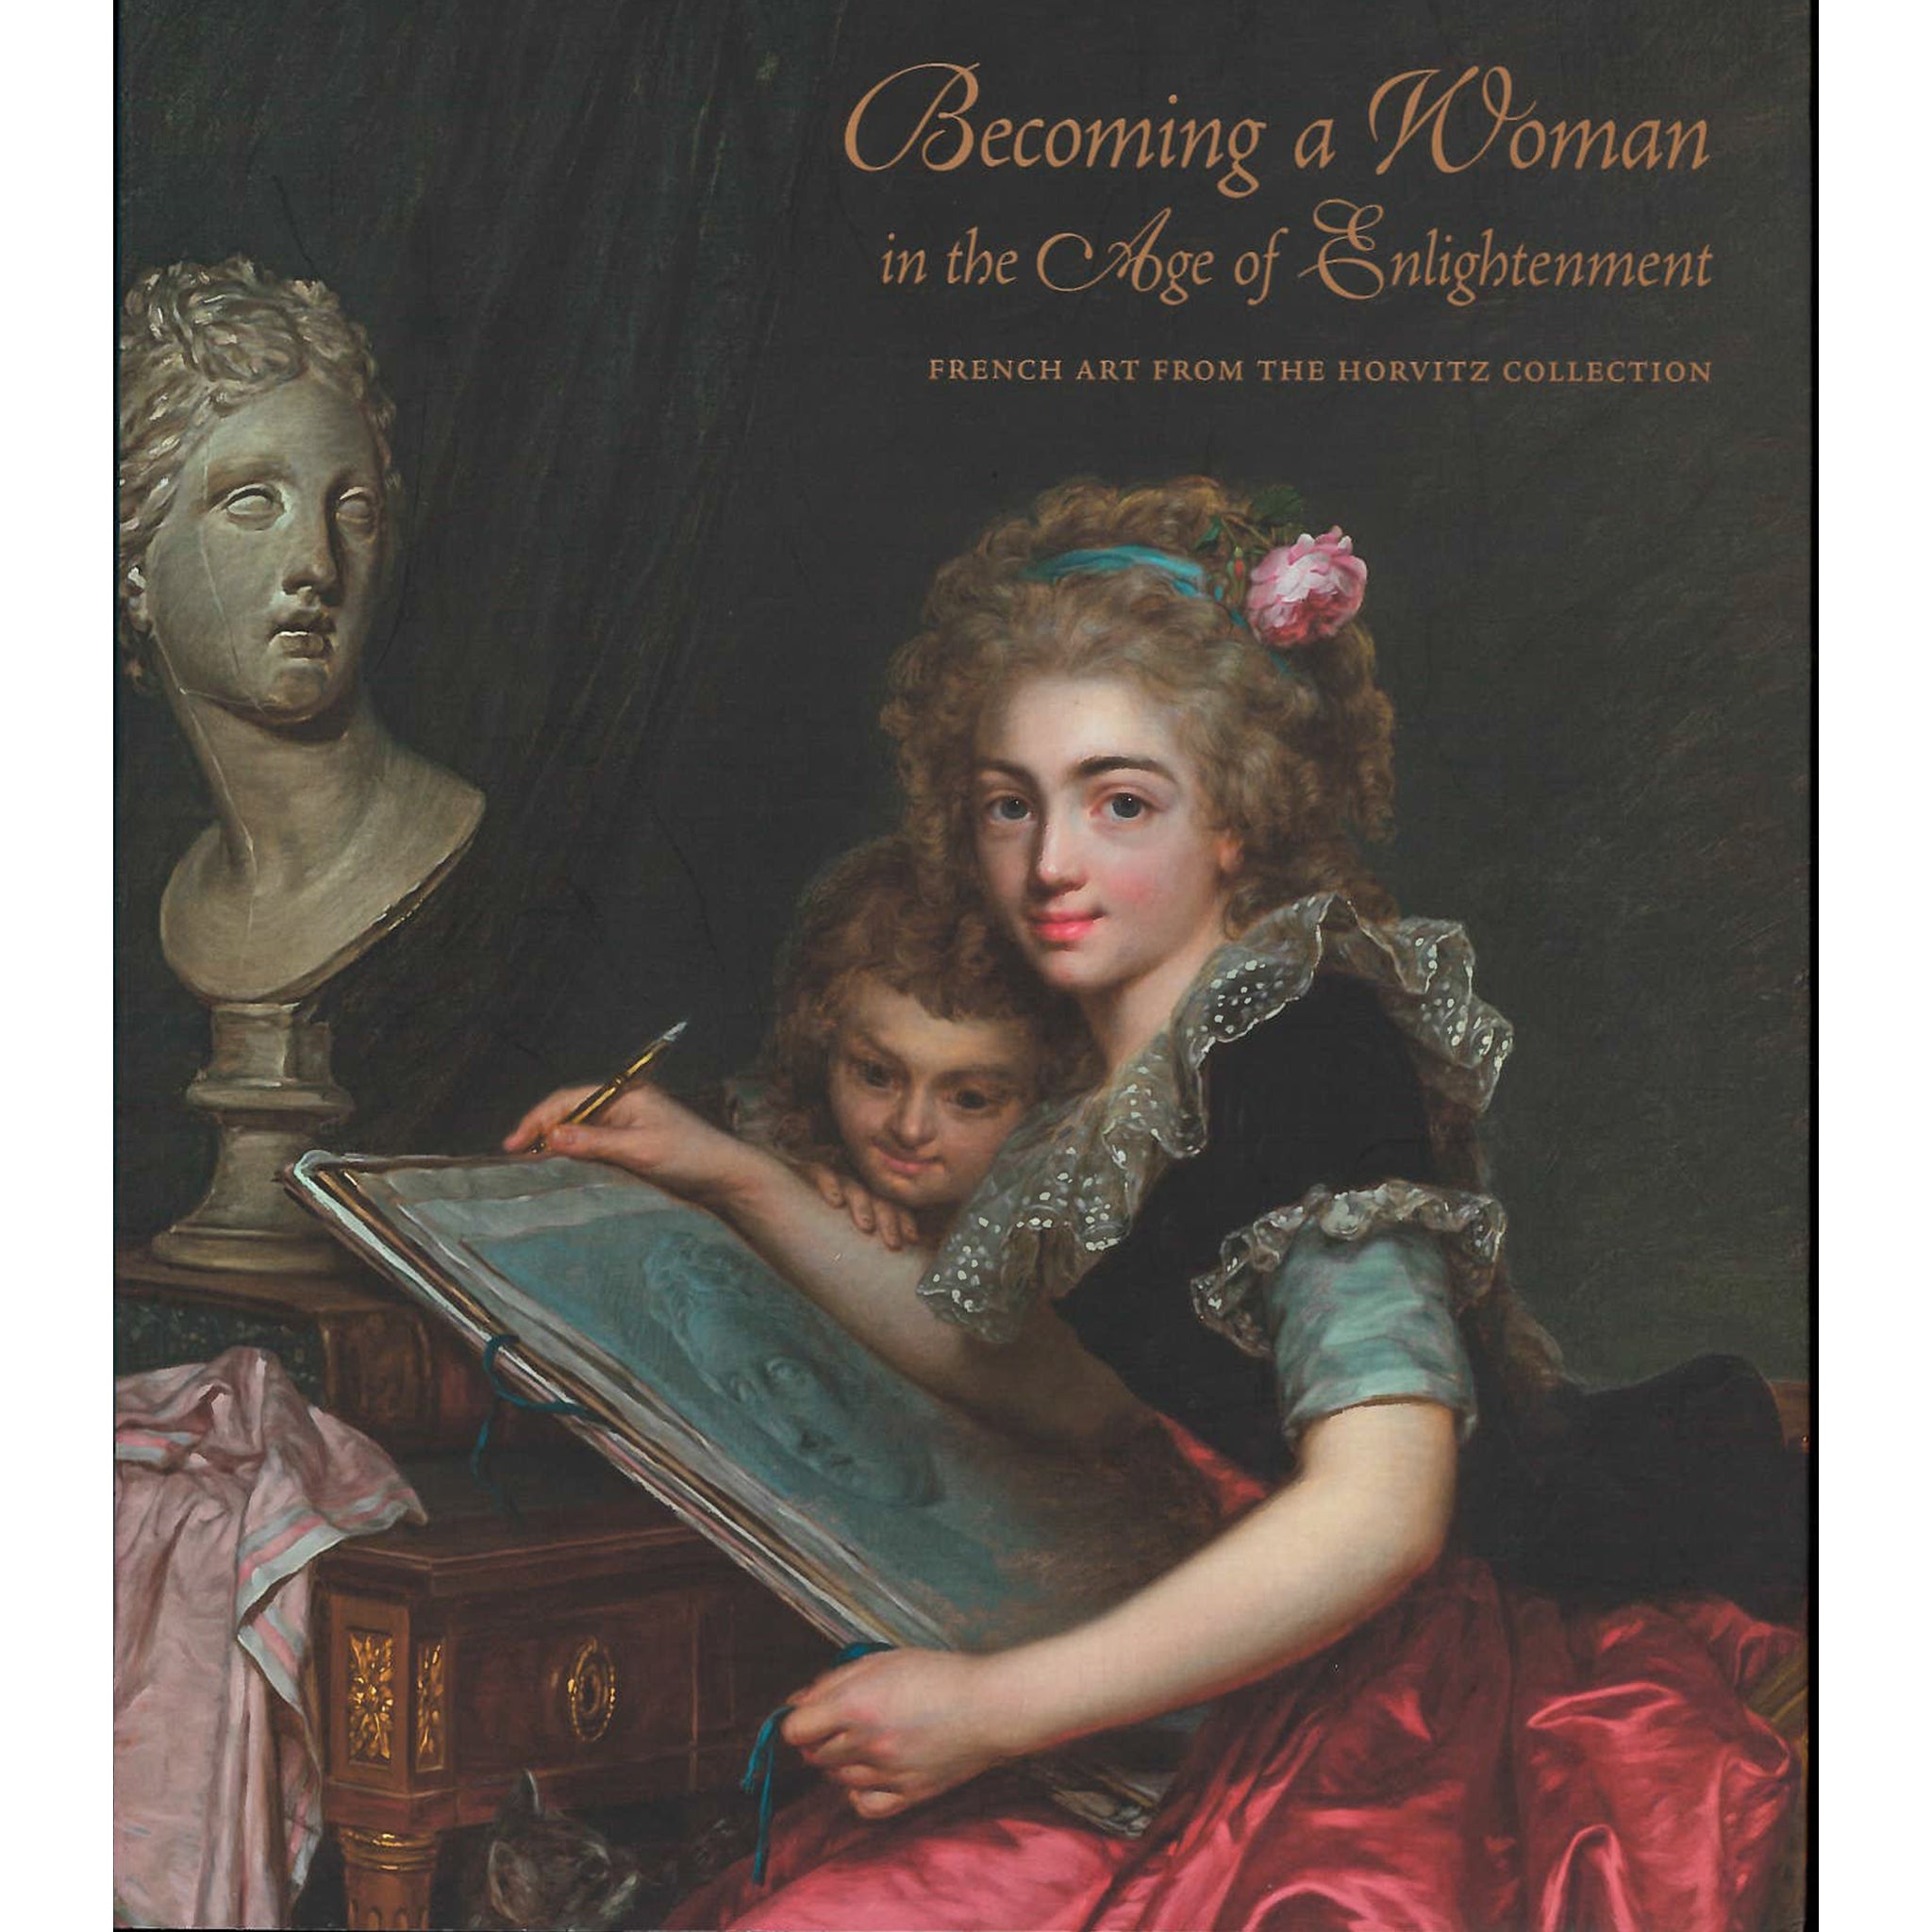 Becoming a Woman in the Age of Enlightenment Exhibit Catalogue book SCMA Smith College Museum of Art